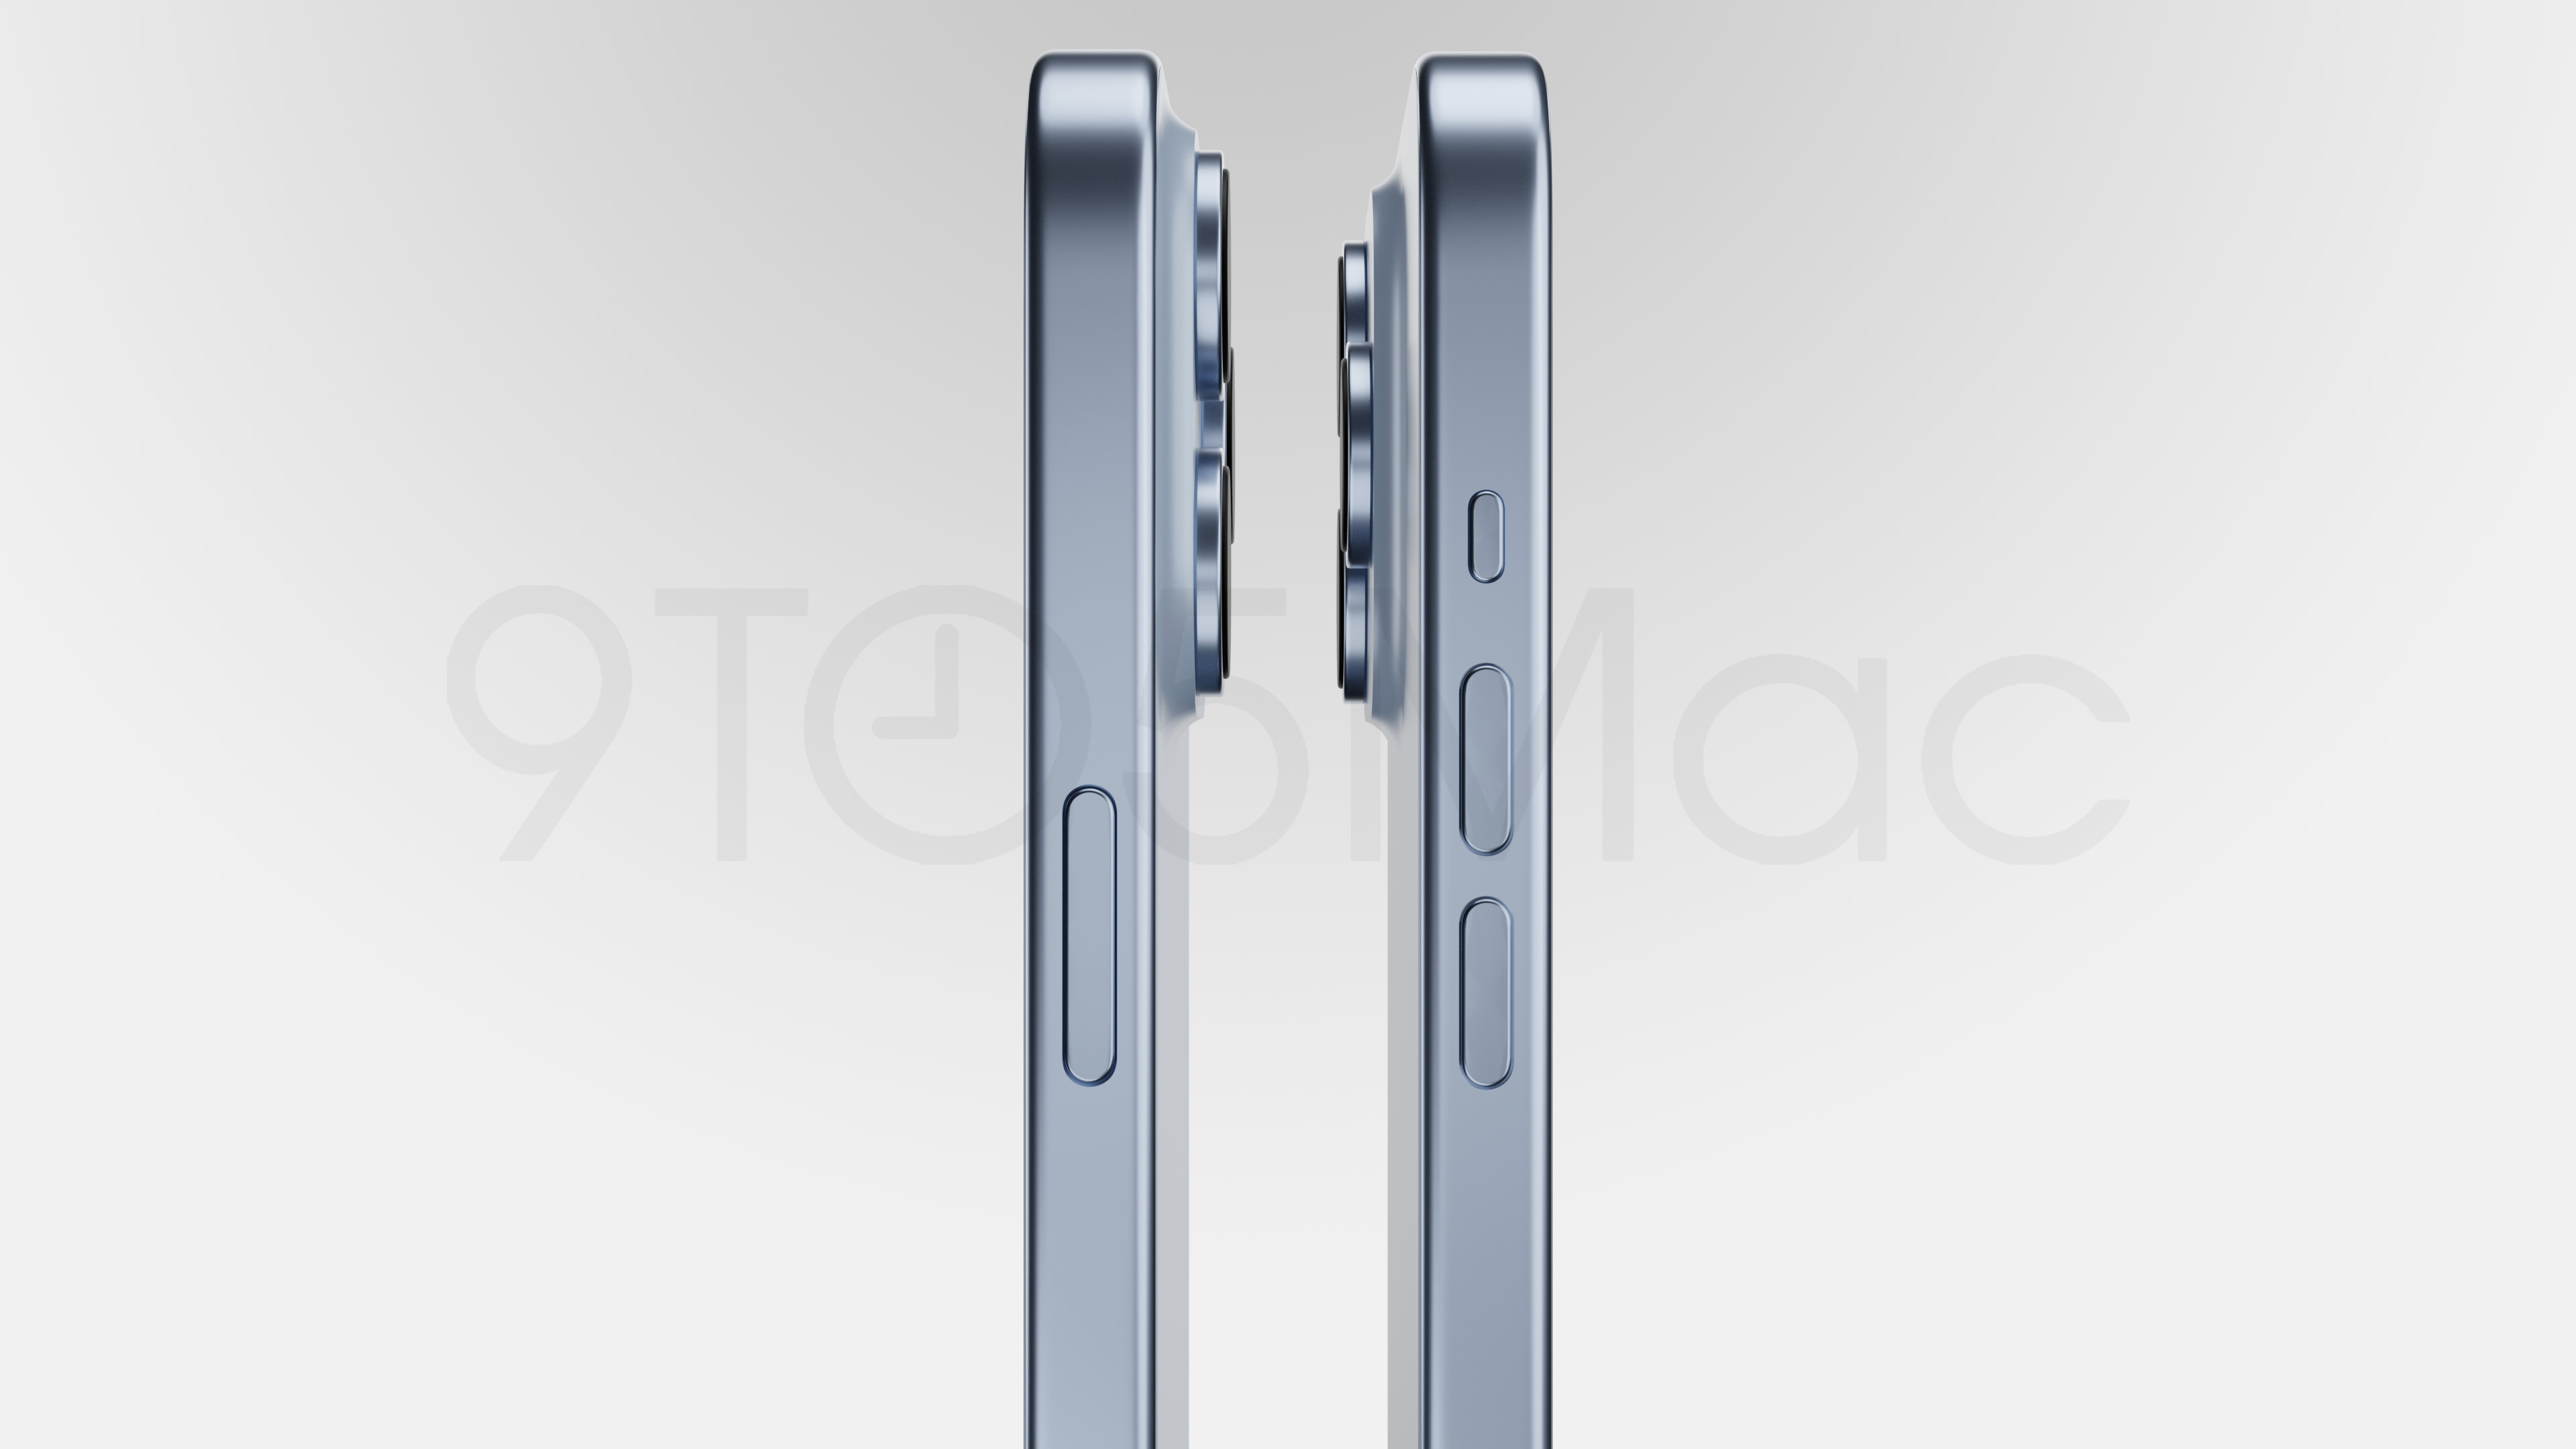 Rendering showing the side views of the iPhone 15 Pro with mechanical power, volume and mute buttons